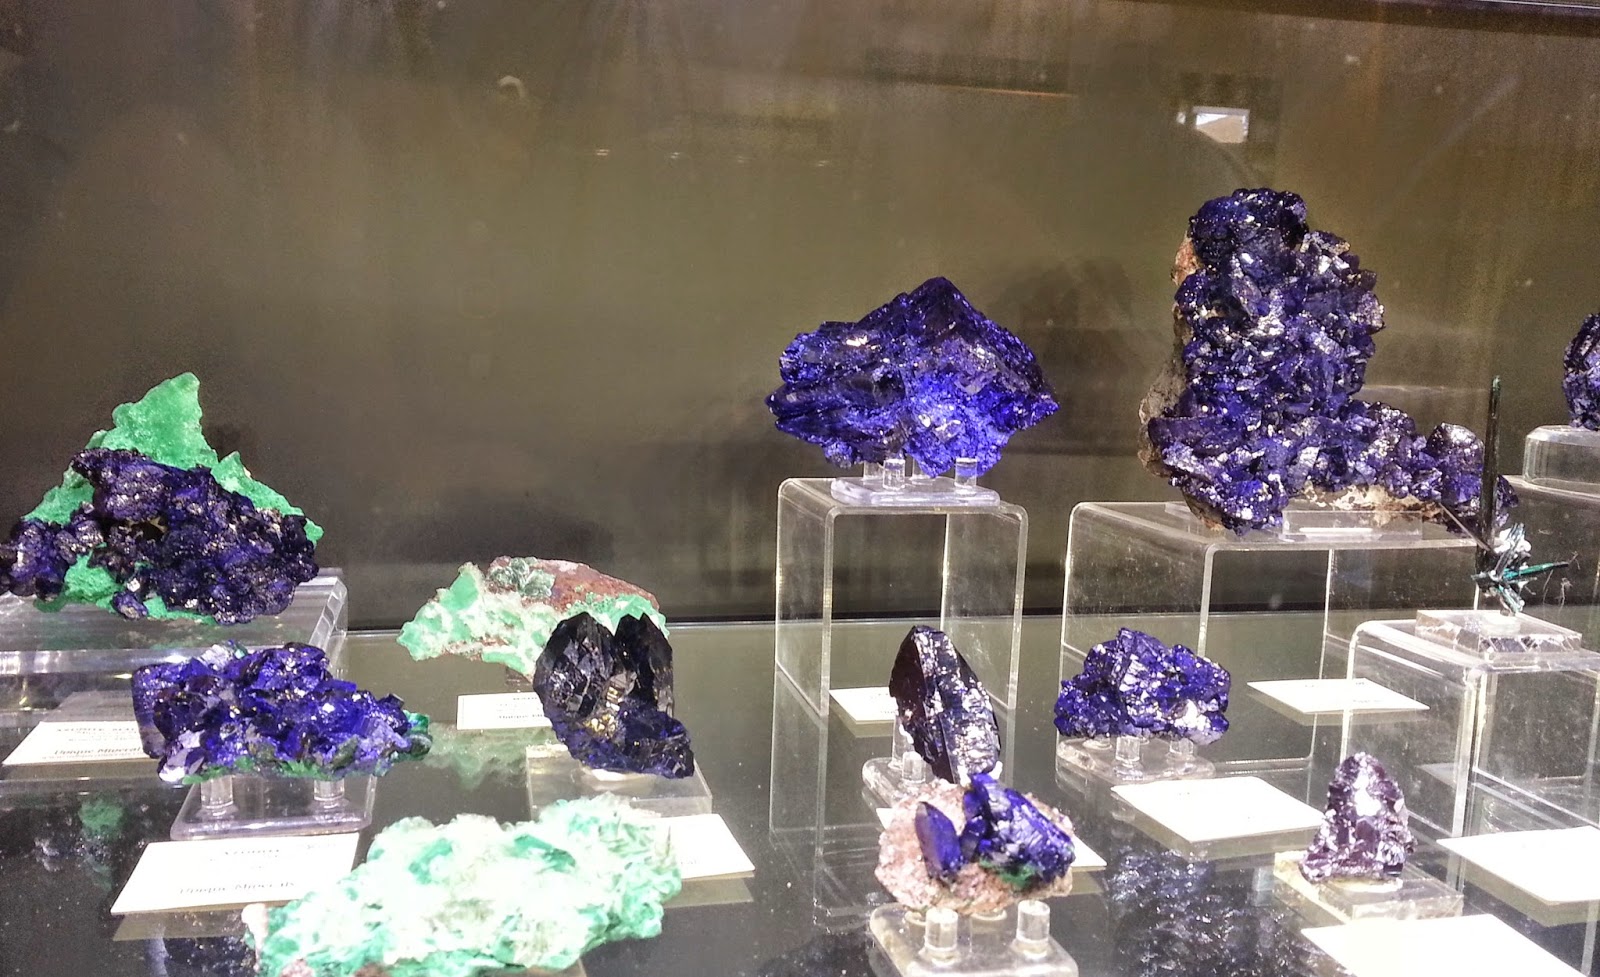 EZ-Guide to Gem and Mineral Shows: #Denver #GemShow - Day One! The ...